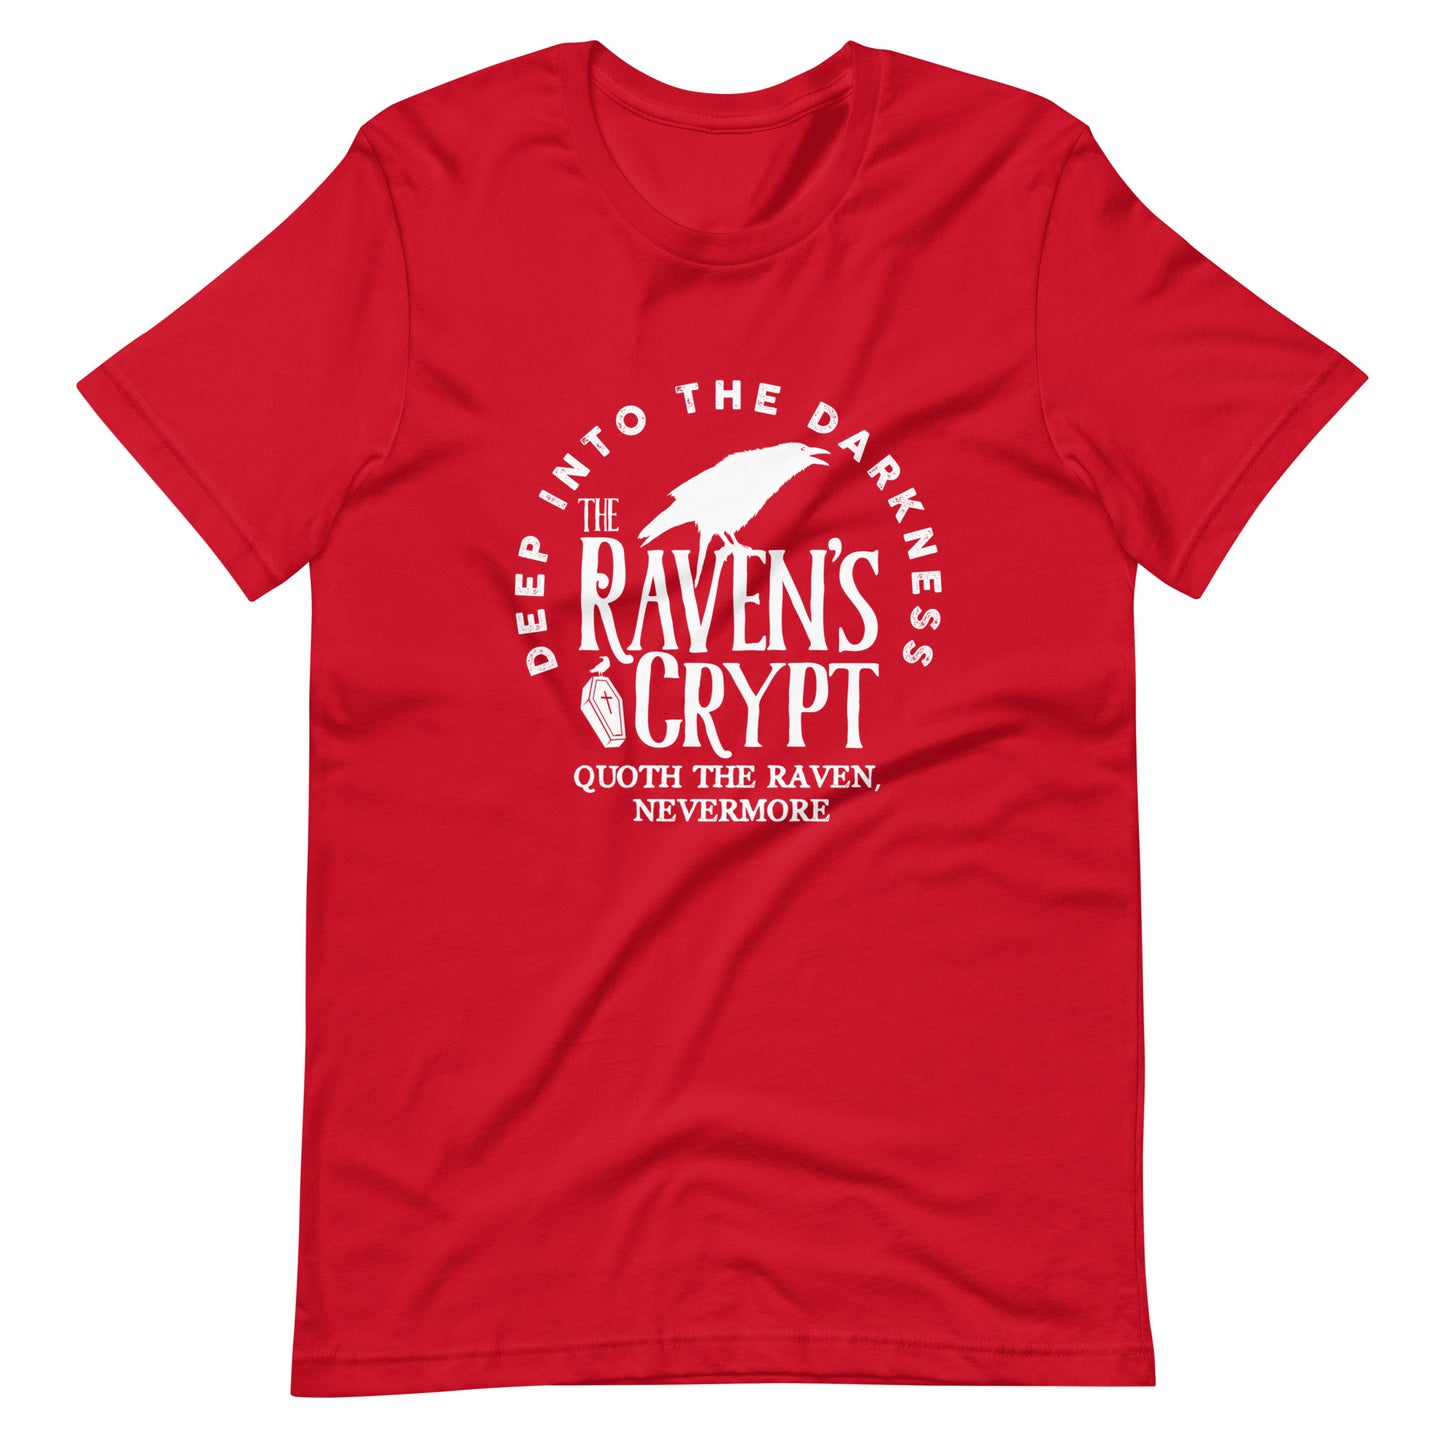 Deep Into the Darkness The Raven's Crypt - Men's t-shirt - Red Front